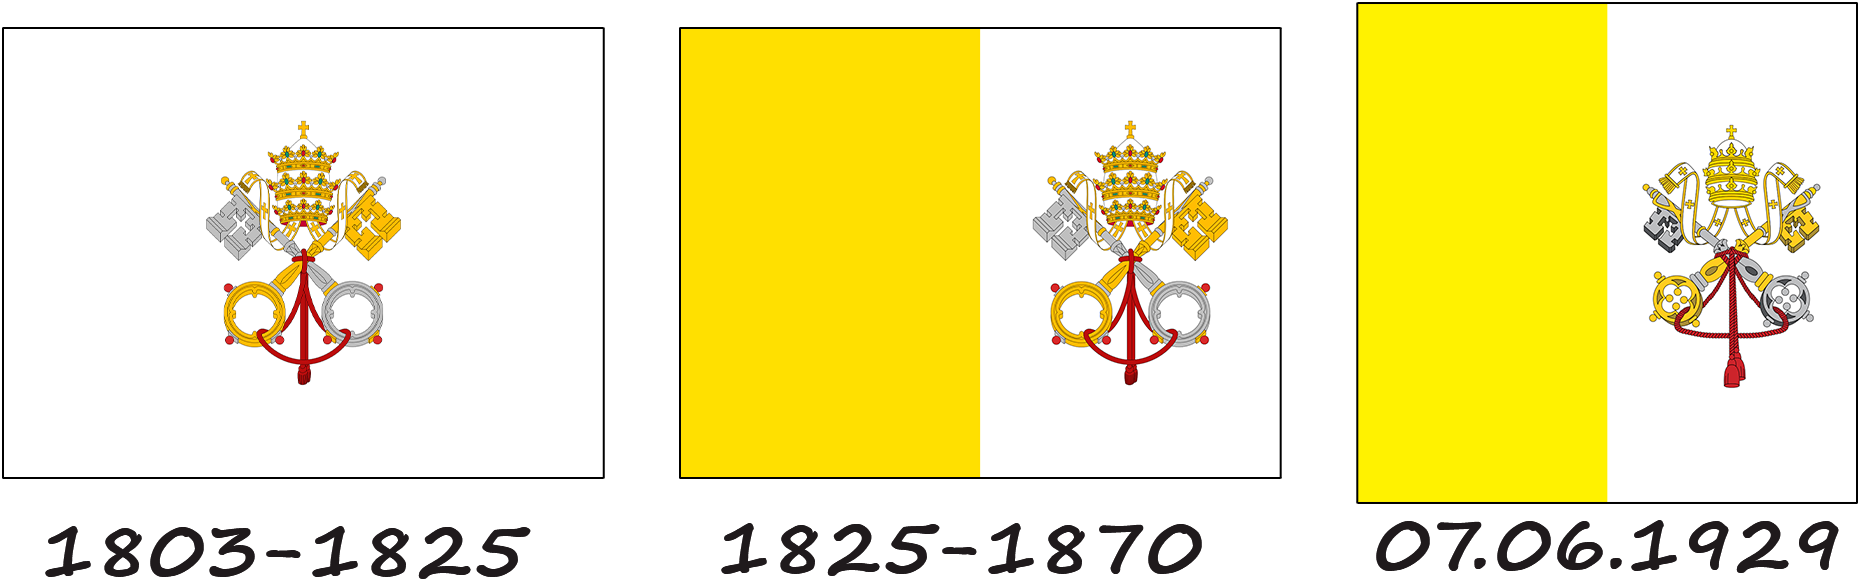 History of the Vatican flag